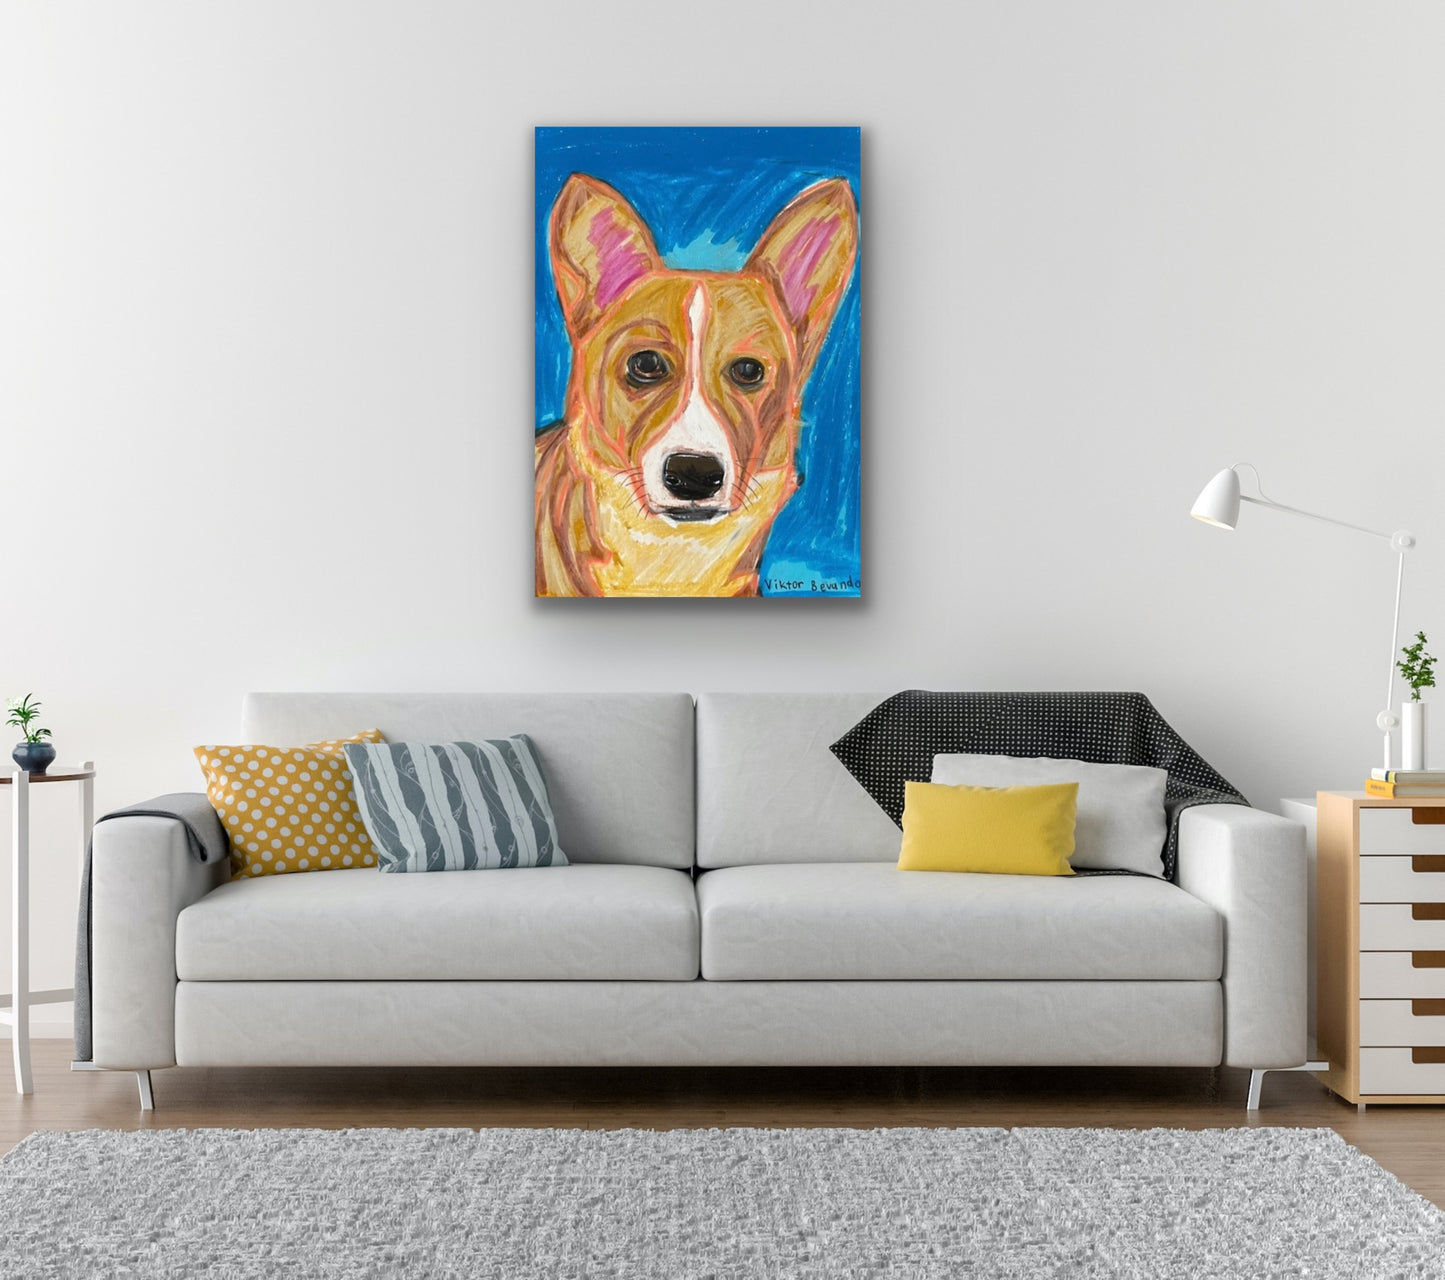 Corgi Dog - Stretched Canvas Print in more sizes